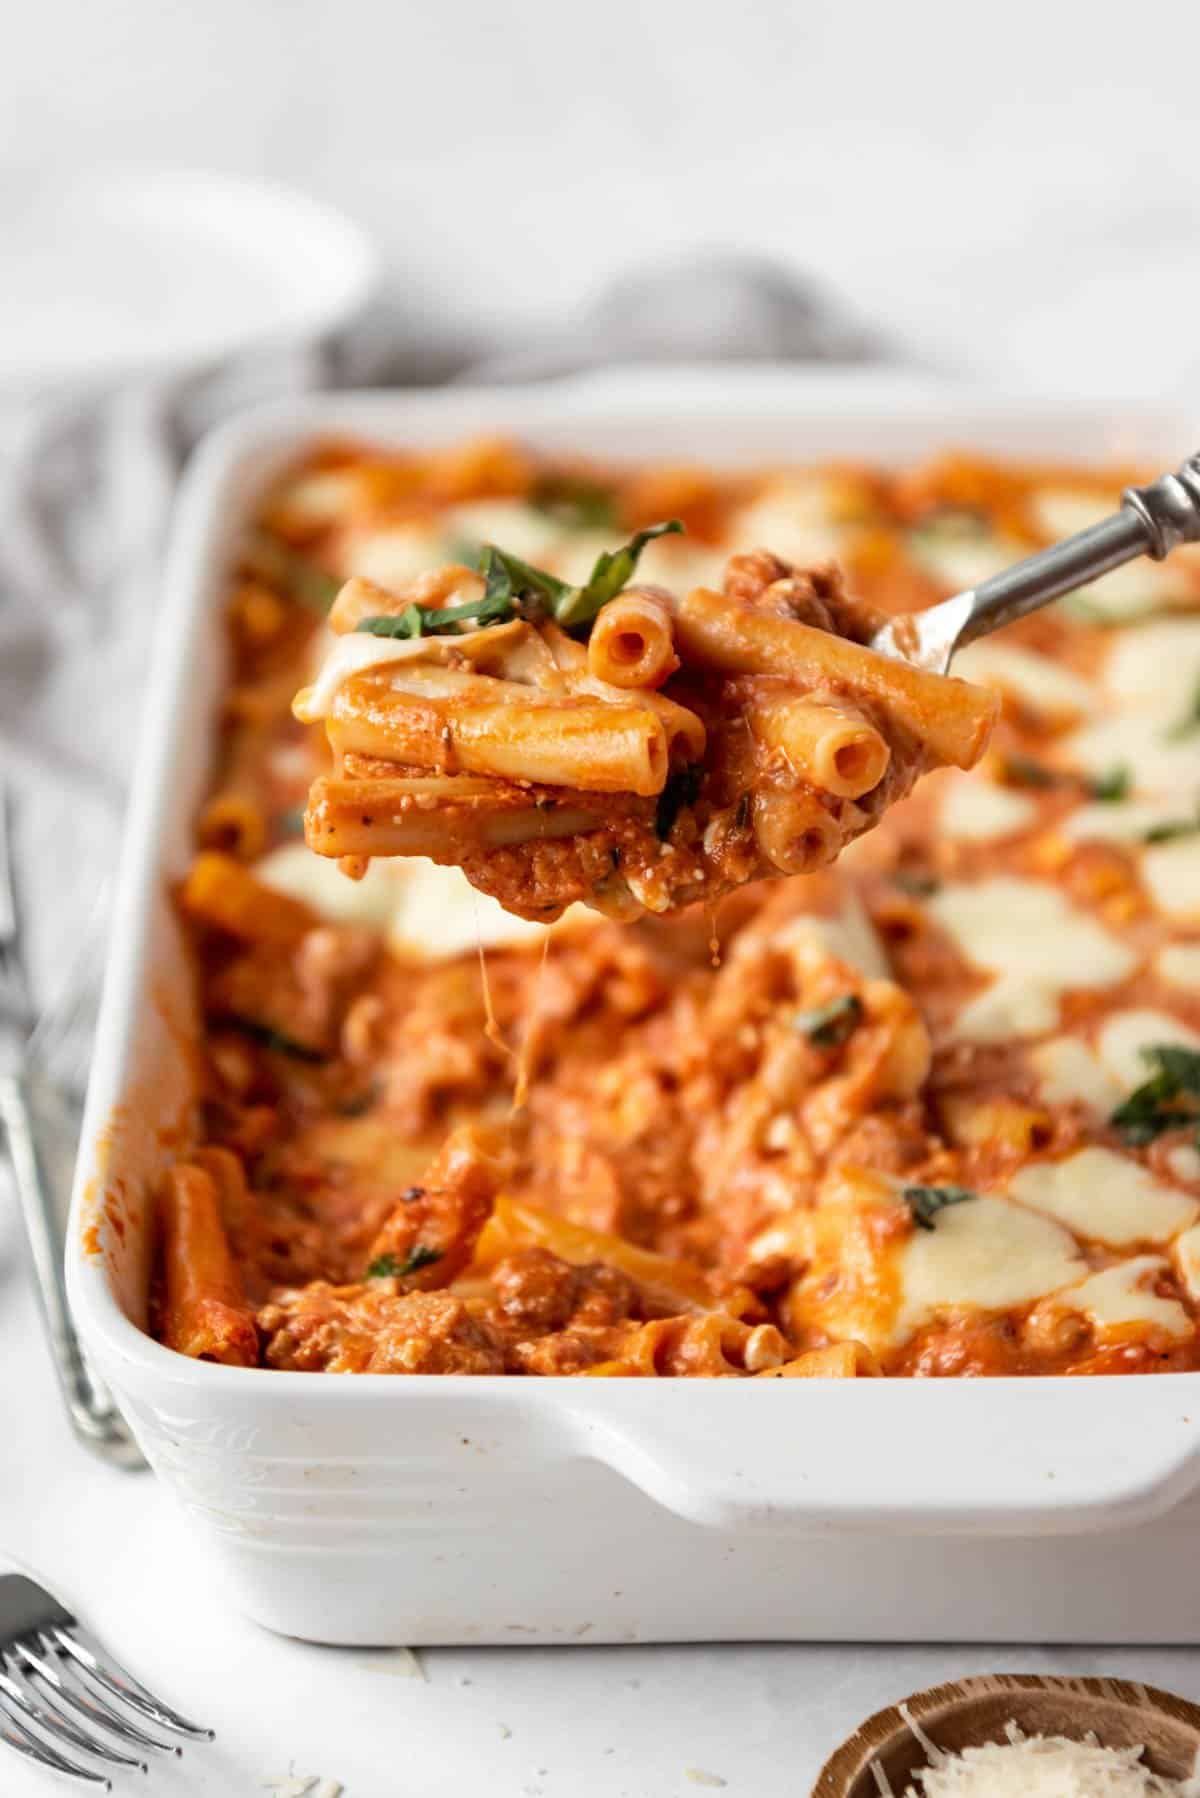 A spoonful of baked ziti being lifted out of the pan.